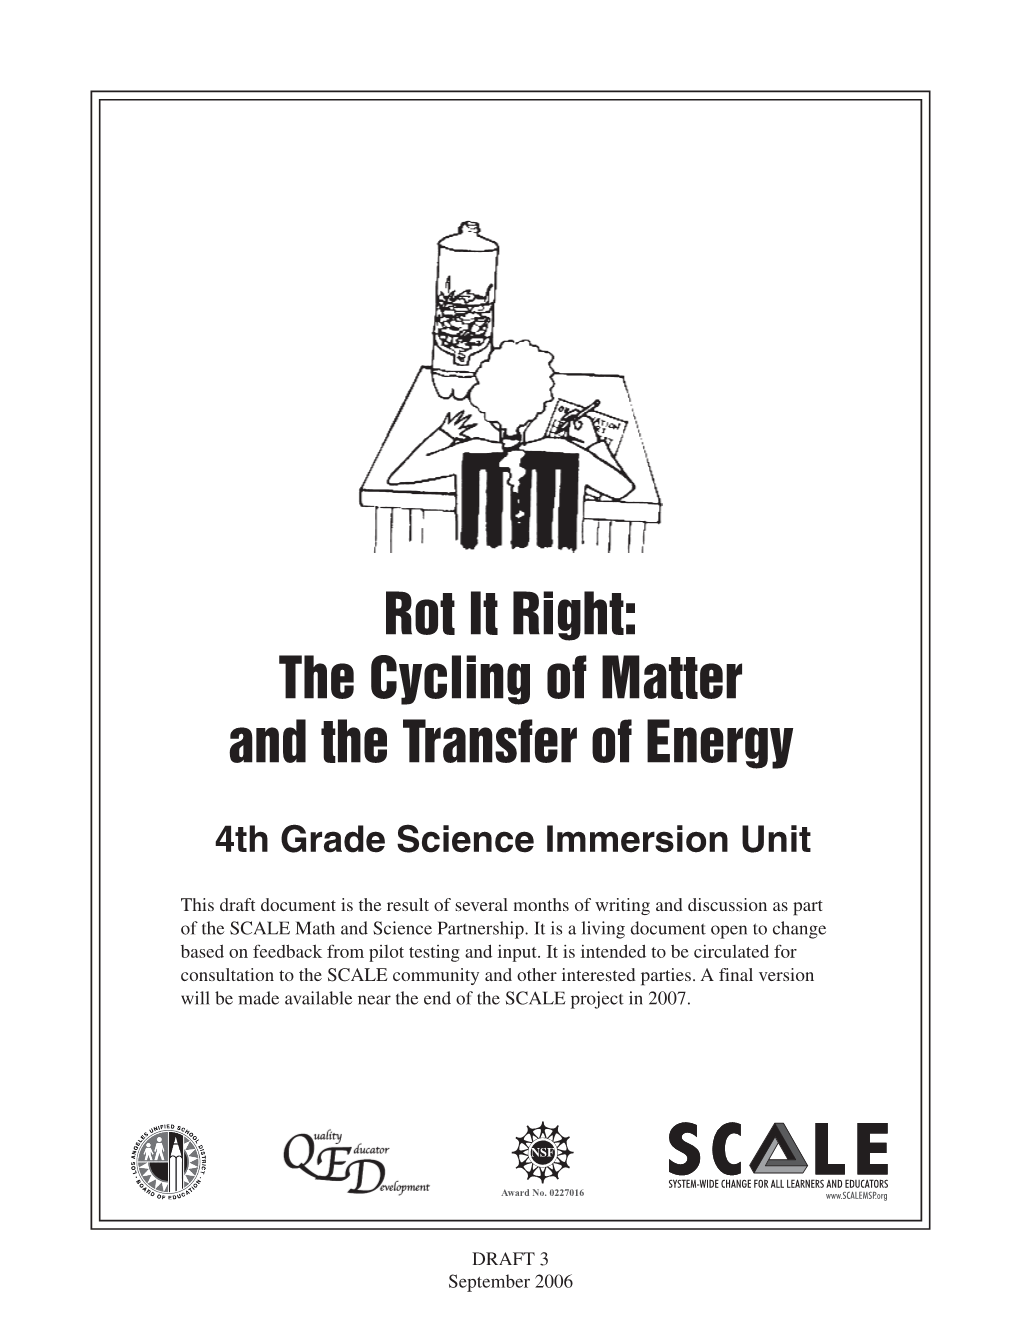 Rot It Right: the Cycling of Matter and the Transfer of Energy